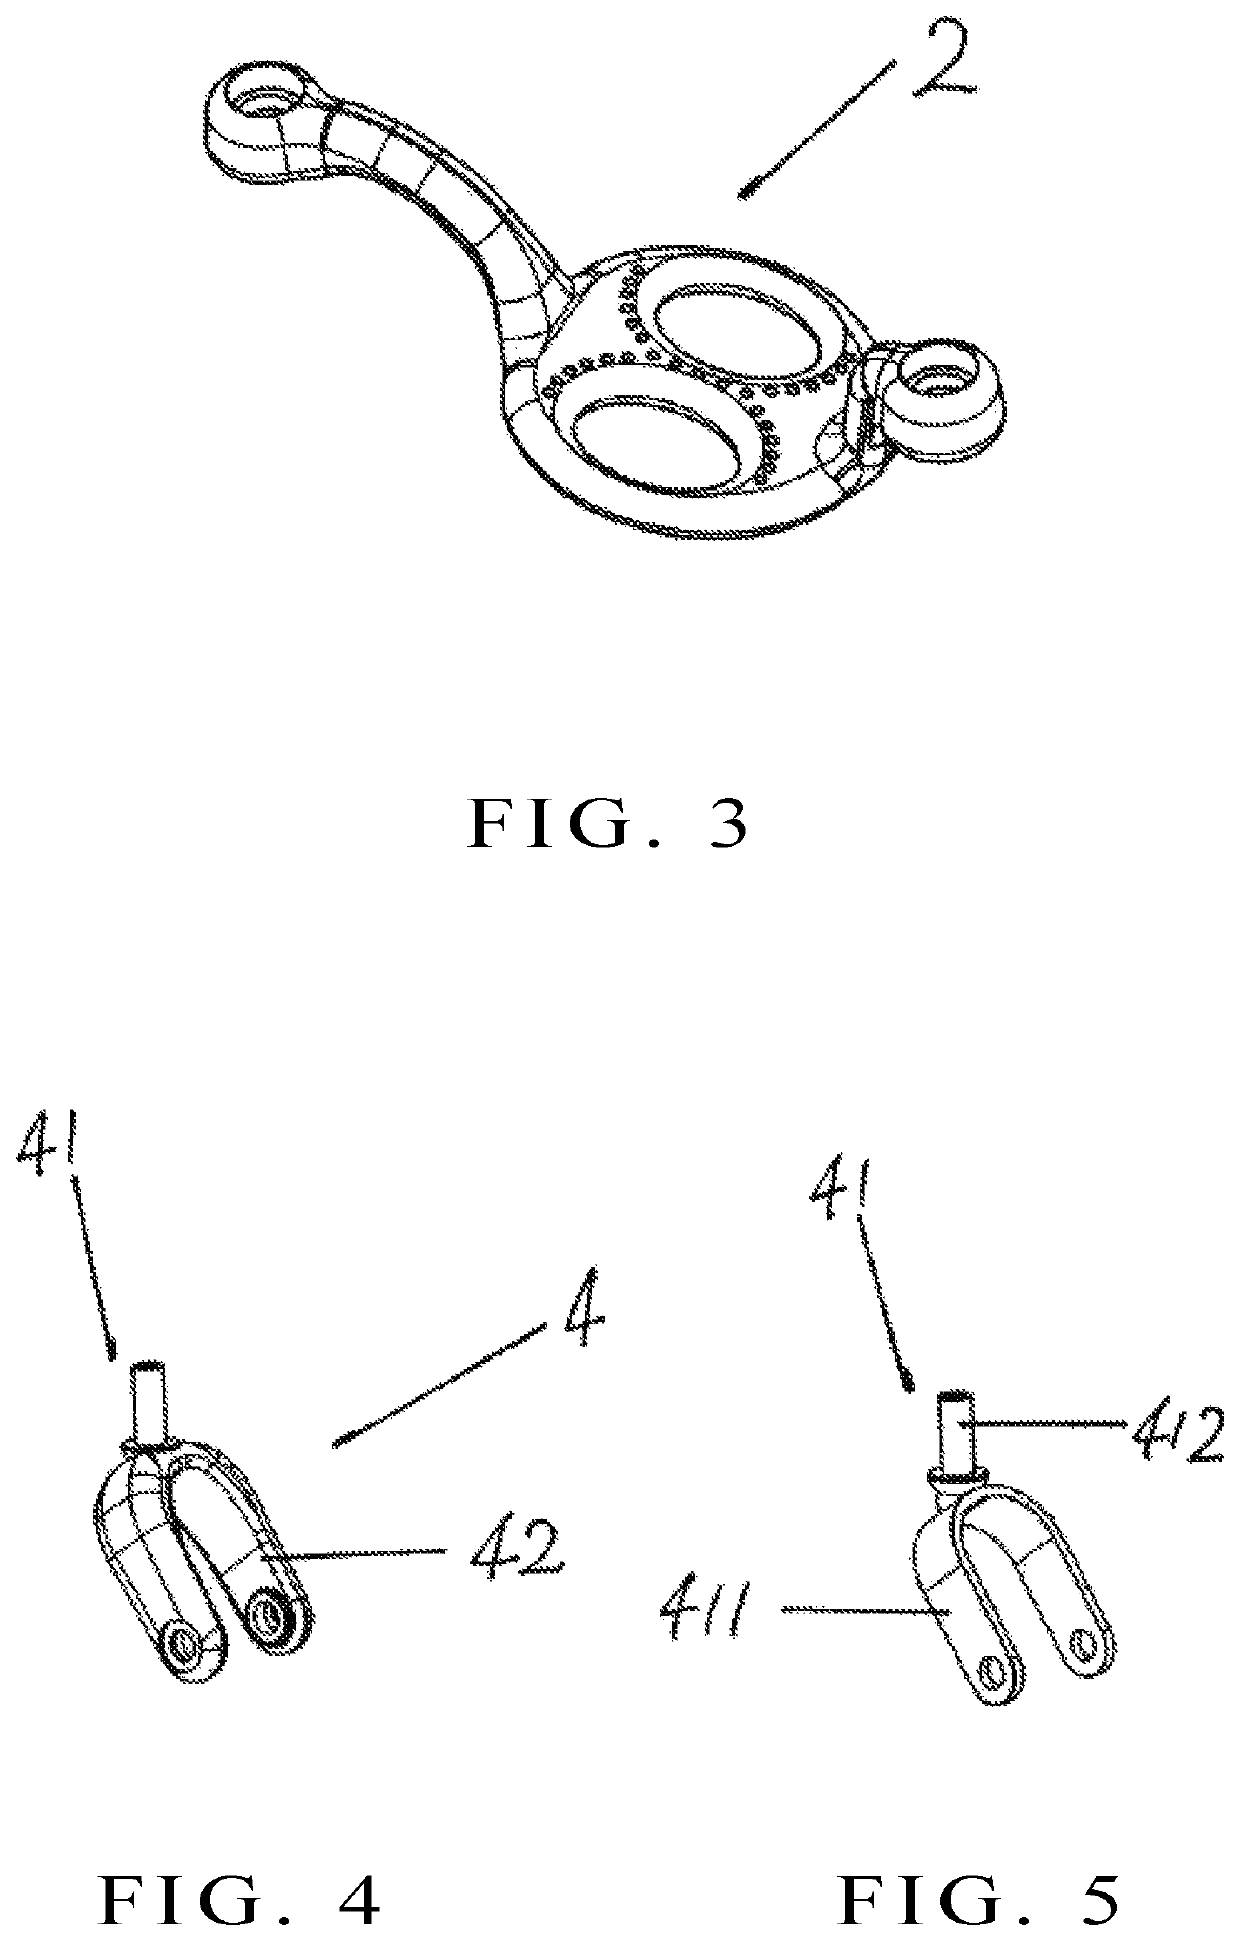 Swing roller skate with novel manufacturing process